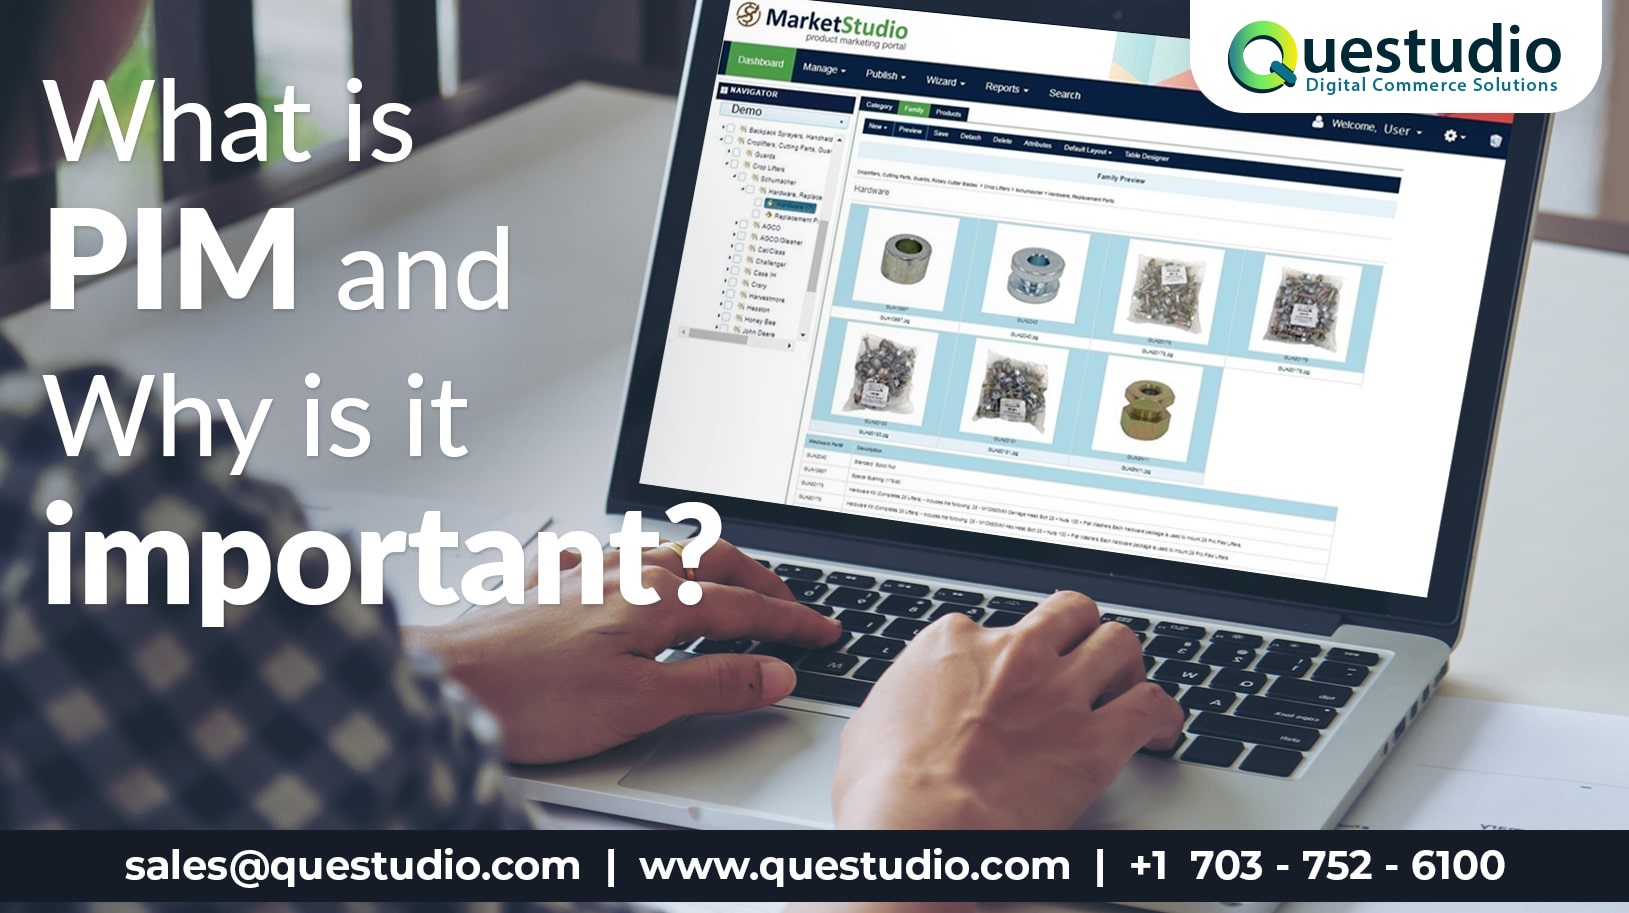 What-is-PIM-and-Why-is-it-important-questudio